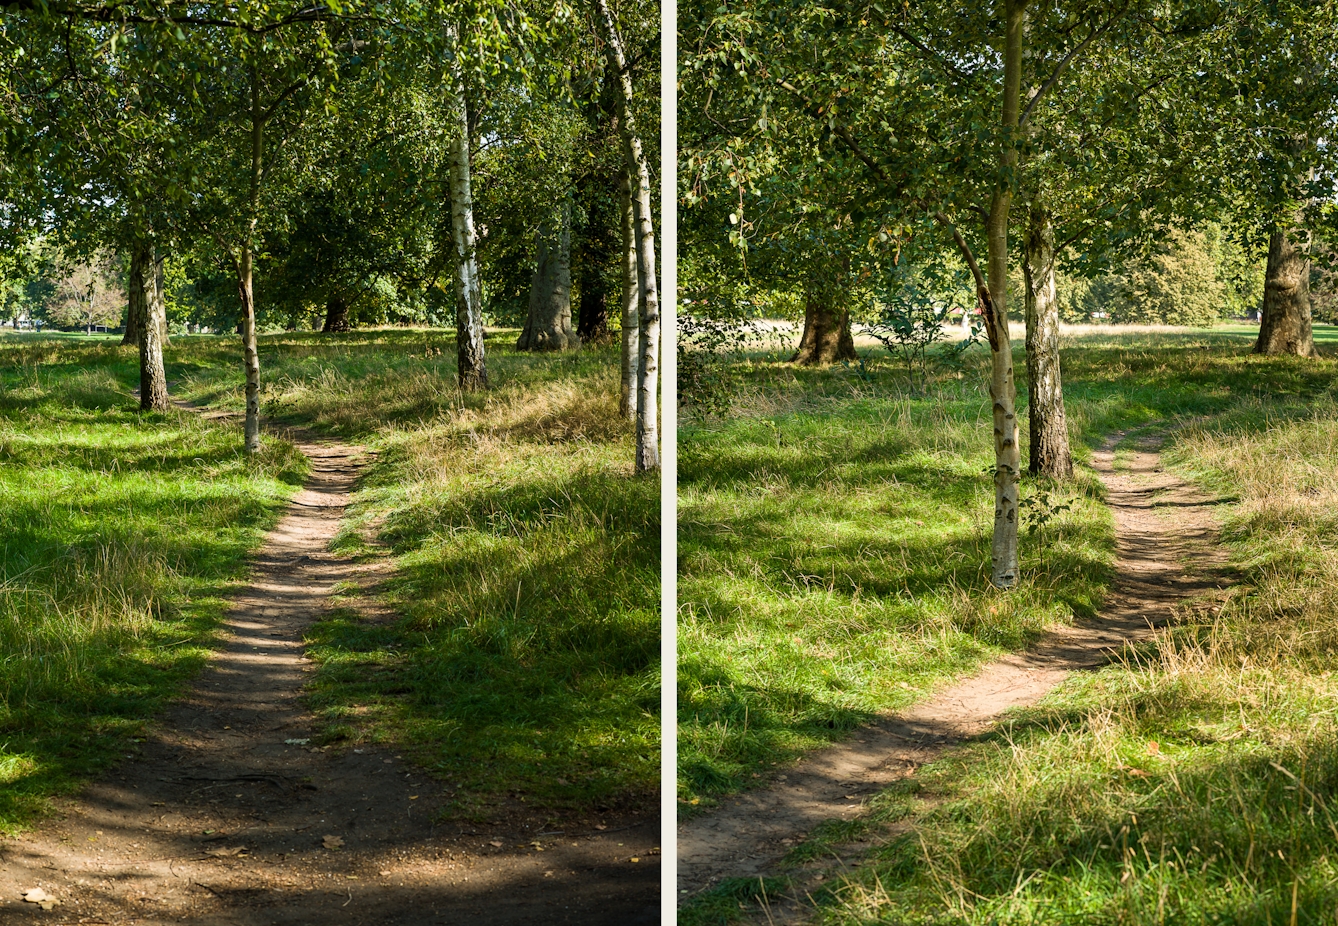 Photographic diptych. Both images show a wooded parkland scene with a rough footpath snaking away into the distance. The paths are flanked by rough grassland and trees. Each scene is lit by strong sunlight which in parts is turned into dappled shadows onto the ground by the leaf canopy. 